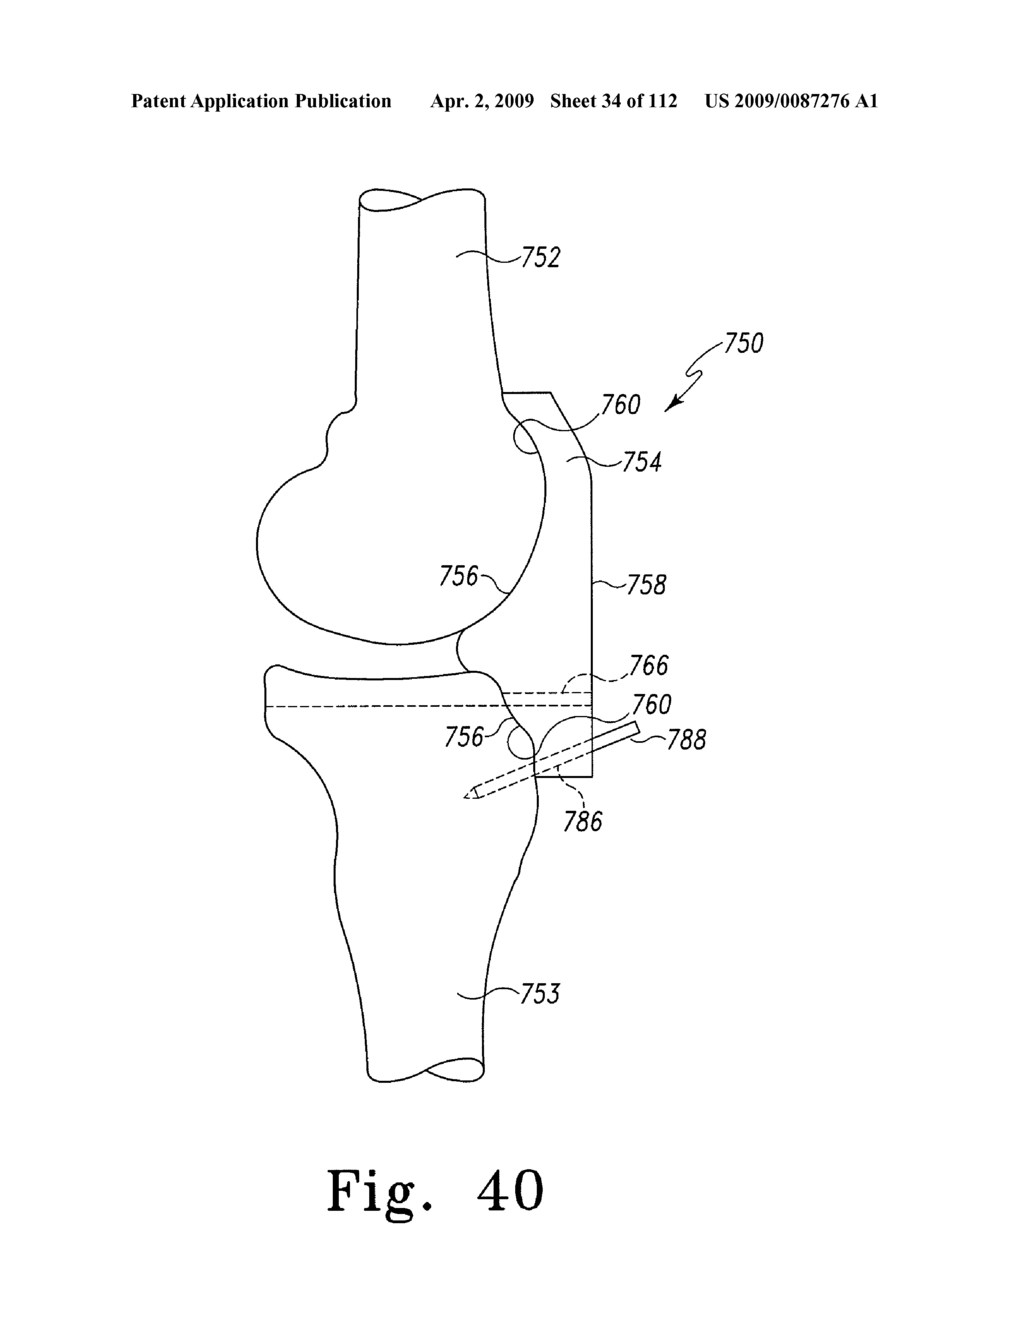 Apparatus and Method for Fabricating a Customized Patient-Specific Orthopaedic Instrument - diagram, schematic, and image 35